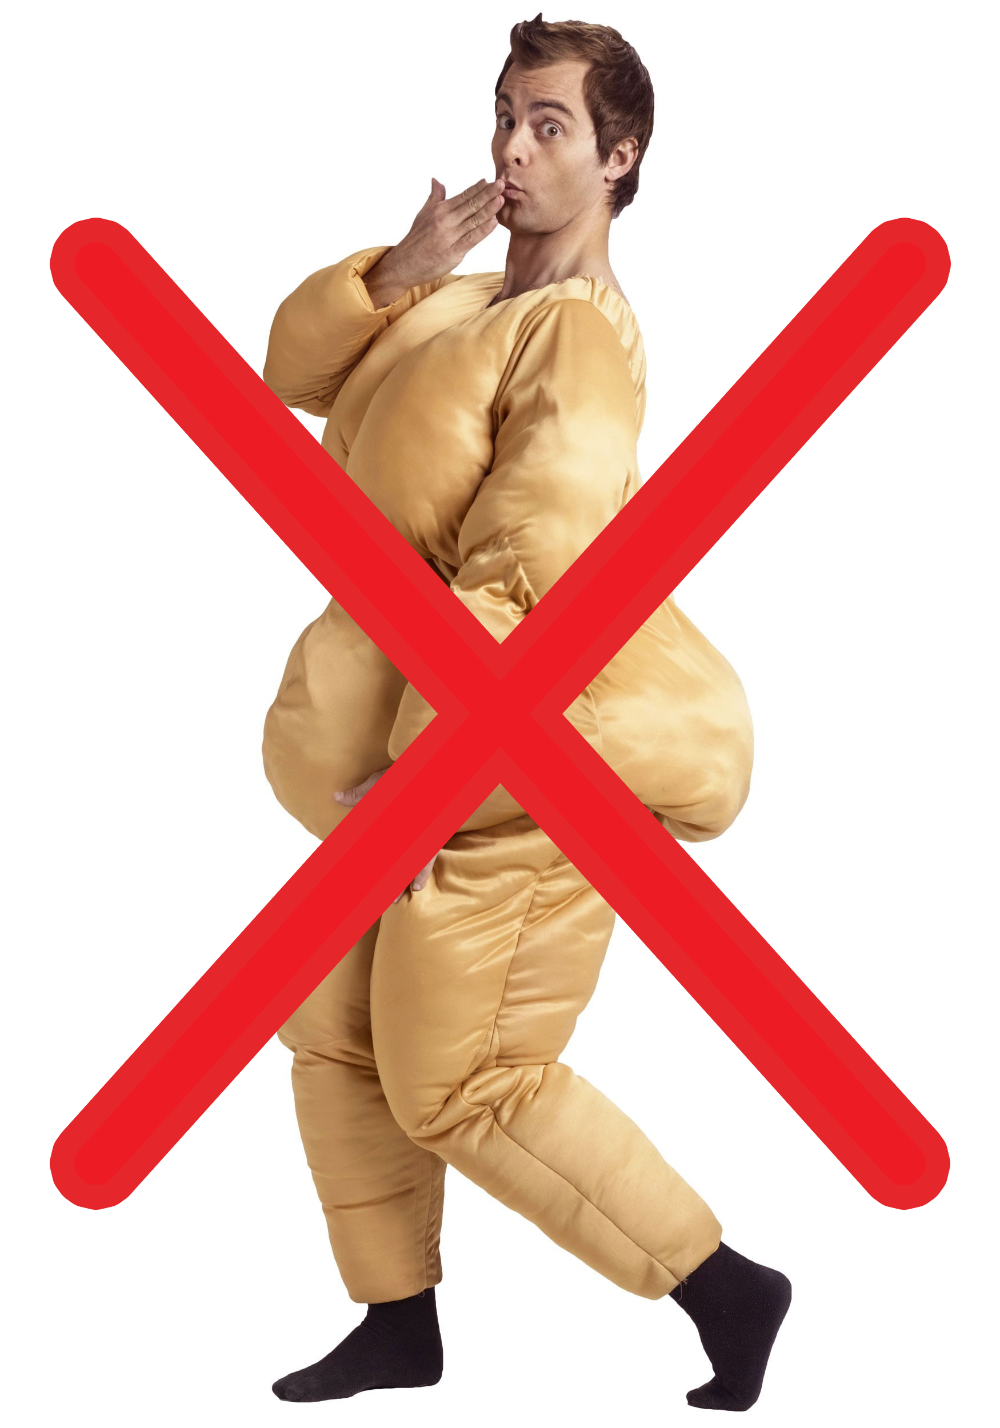 Urge major retail stores to stop selling Halloween "fat costumes"